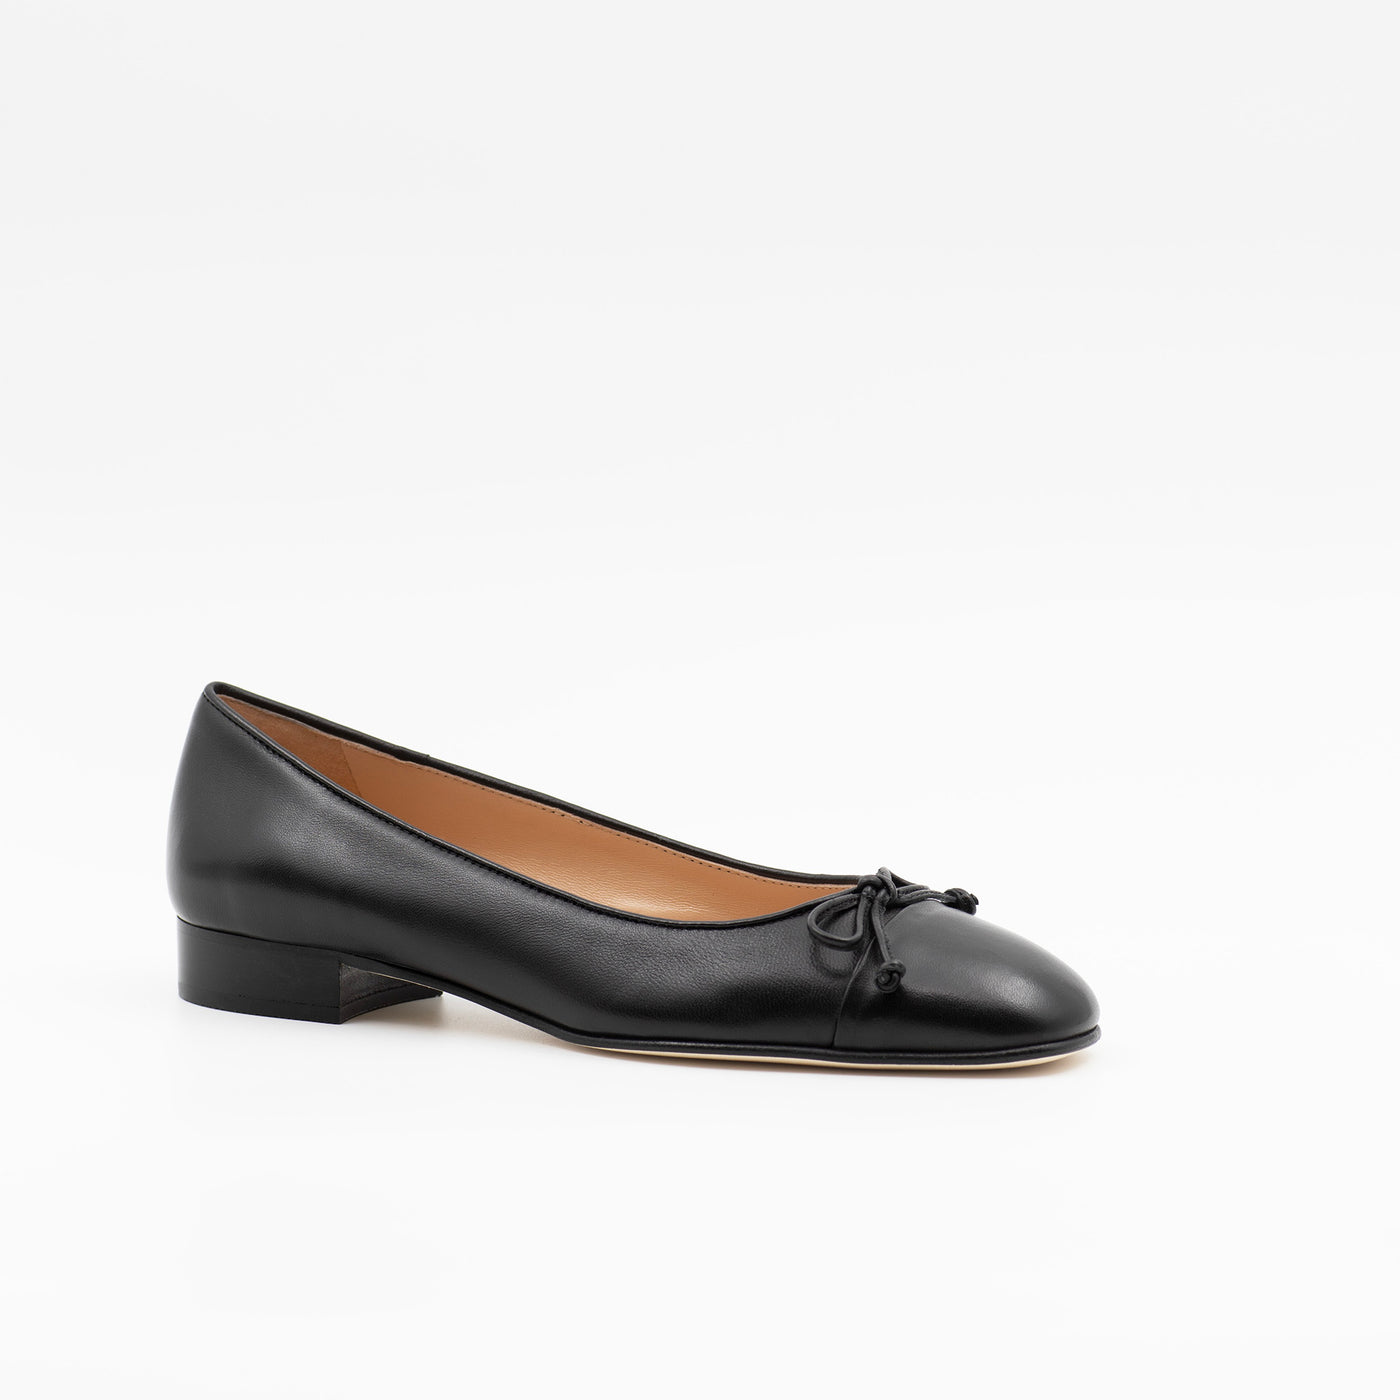 Black ballerina flat with leather bow